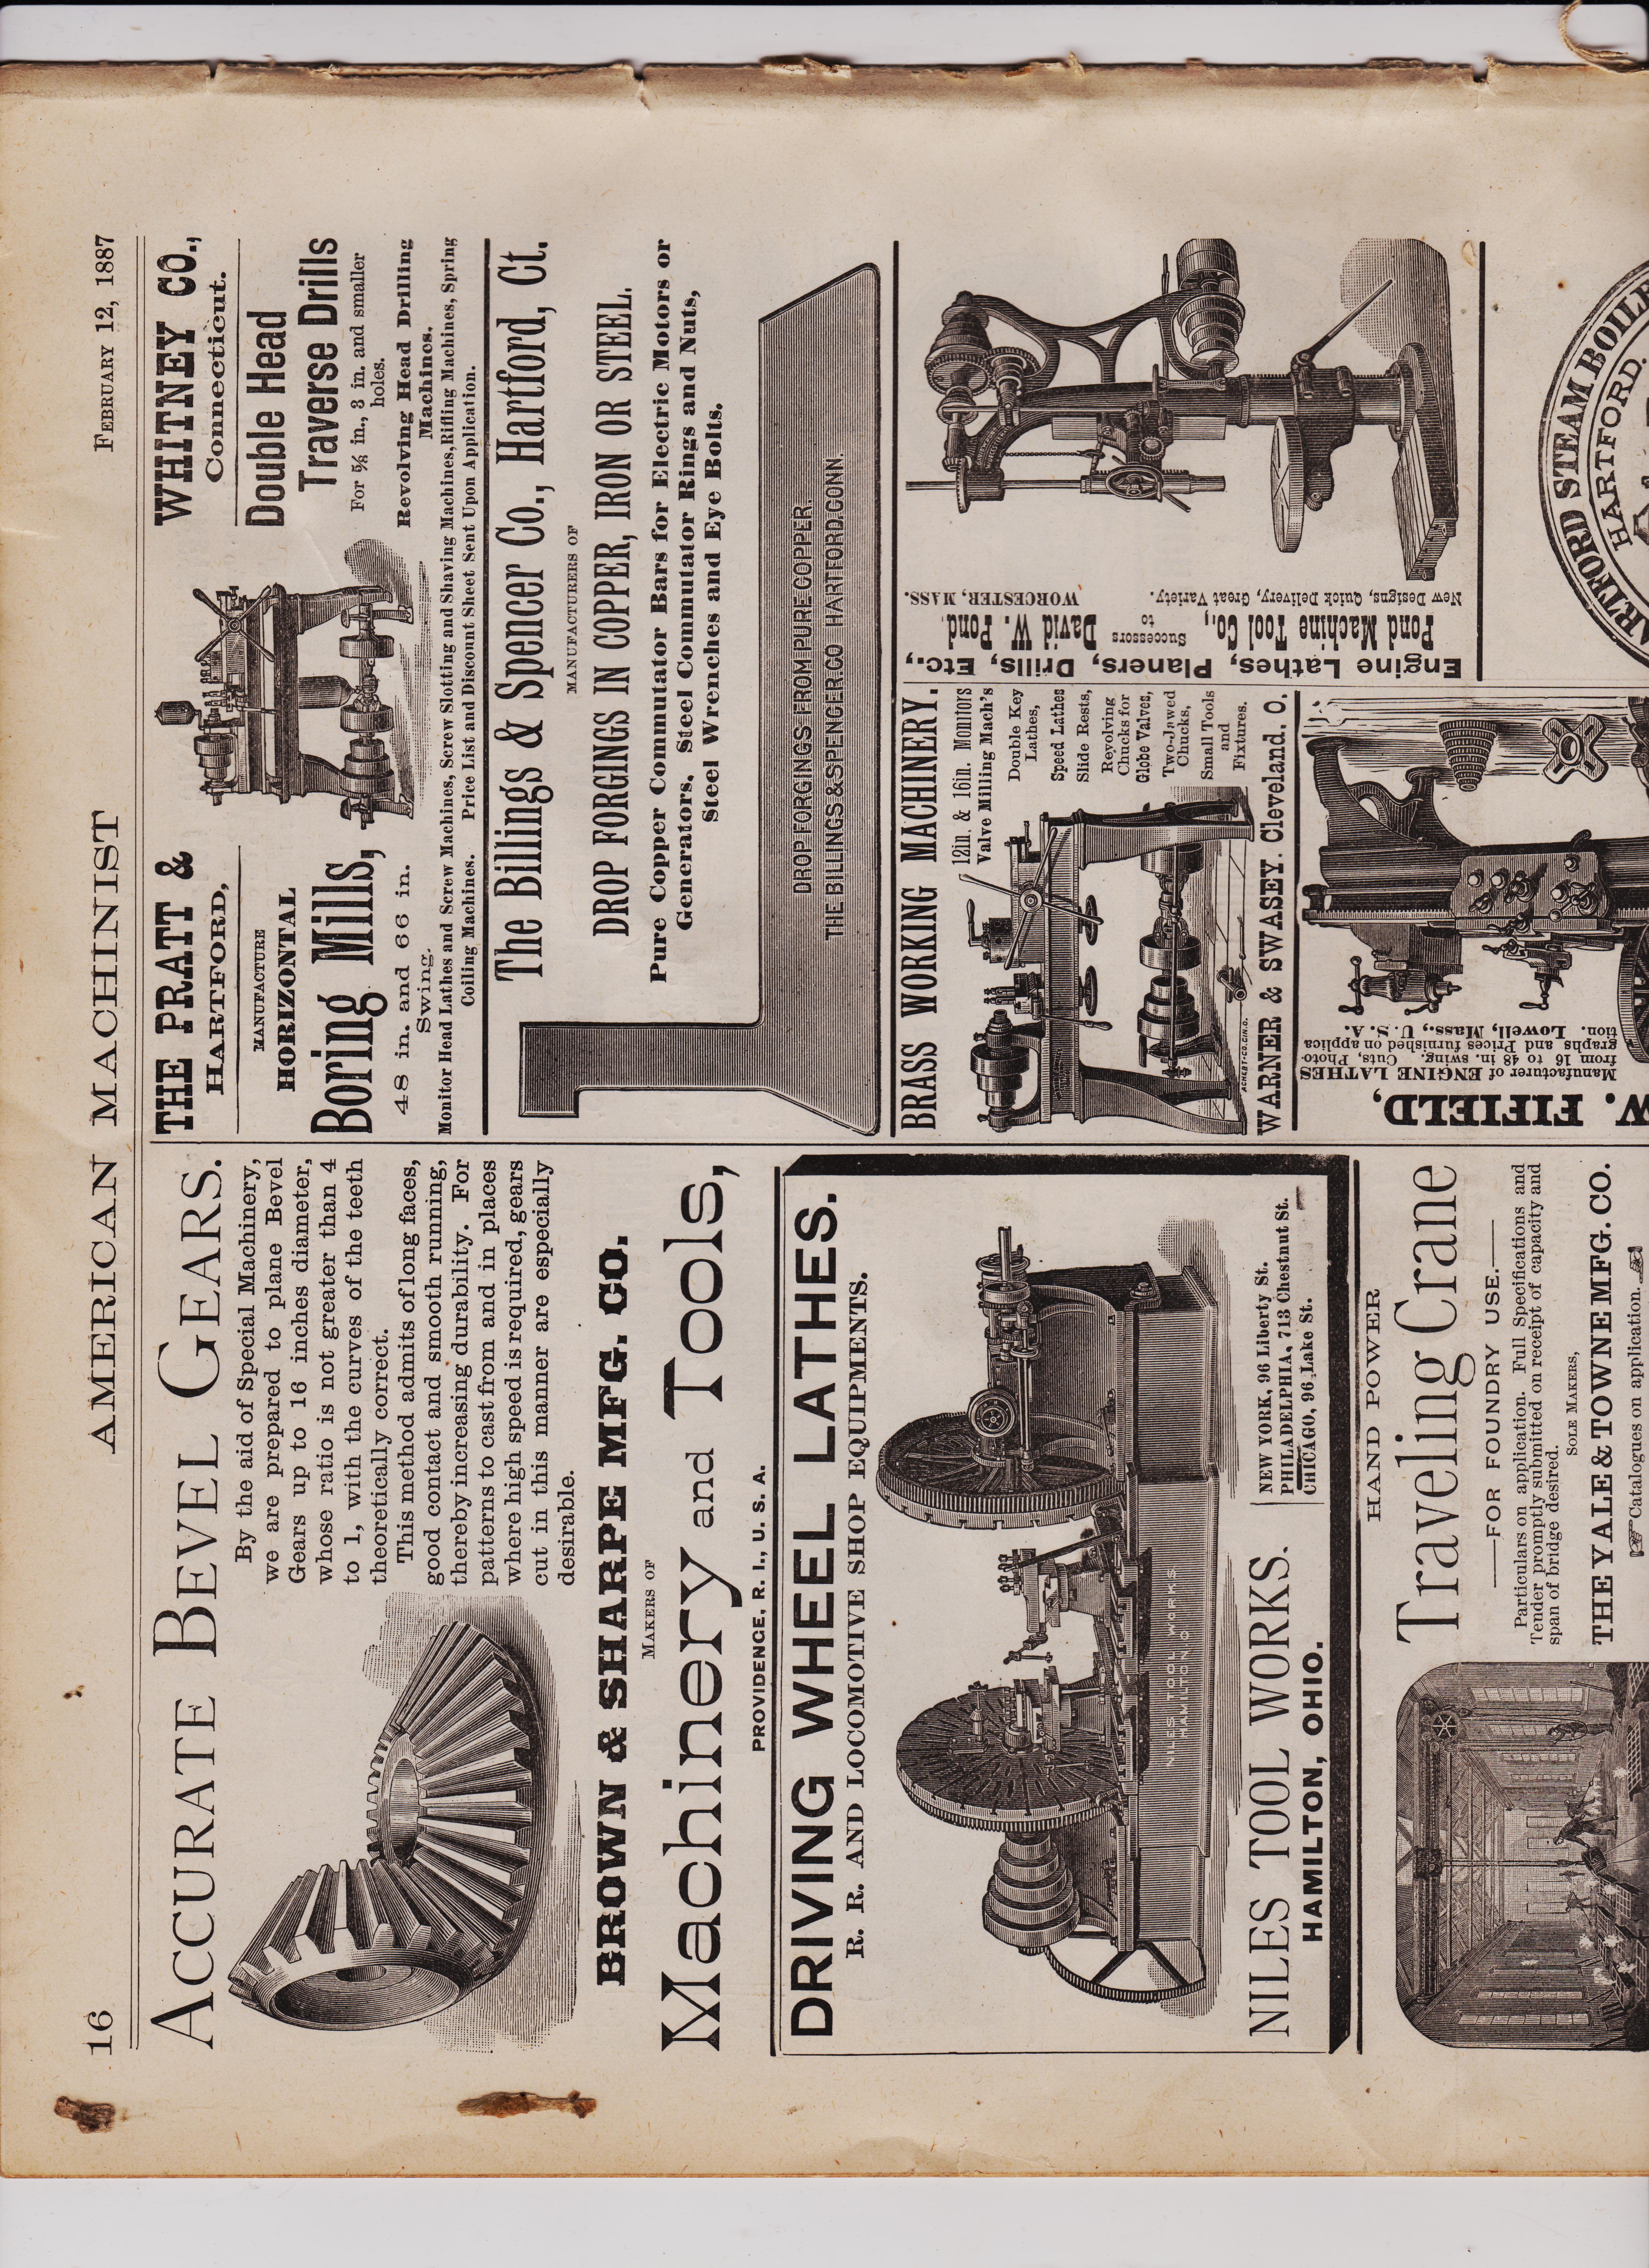 https://antiquemachinery.com/images-American-Machinist-Feb-12-1887/American-Machinist-Feb-12-1887-pg-16-top-Brown-and-Sharpe-Bevel-Gears-Pratt-and-Whitney-Turret-lathe-Warner-and-swasey-Brass-working-turret-lathe-Niles-Tool-Works-David-W-Pond-planers-lathes-drill-Press.jpeg